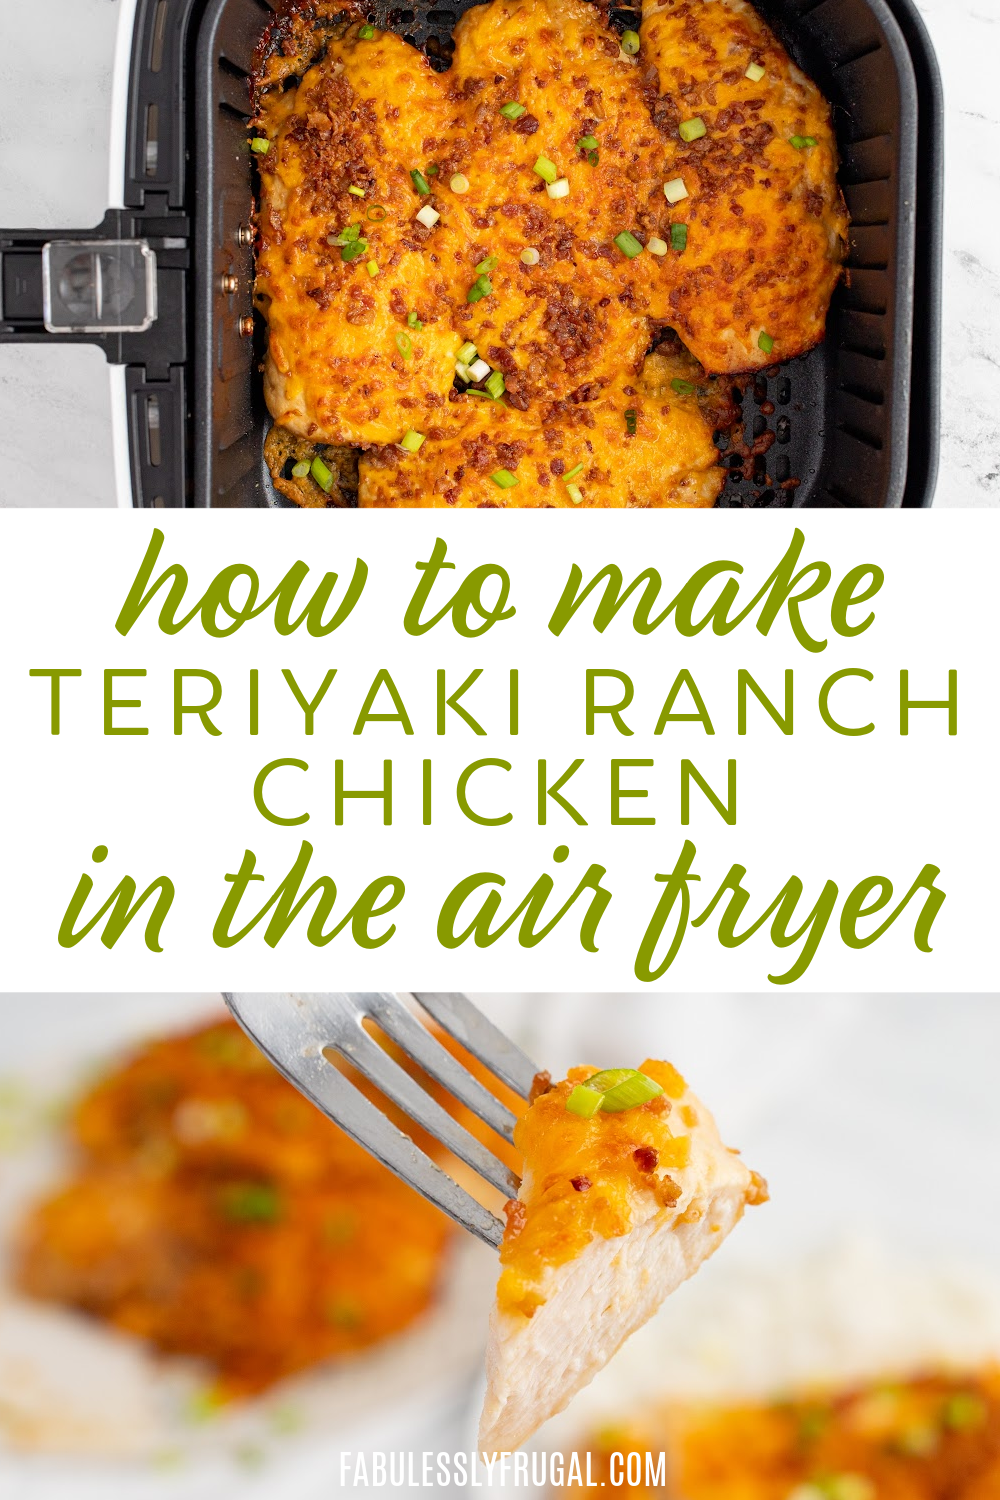 how to make teriyaki ranch chicken in the air fryer